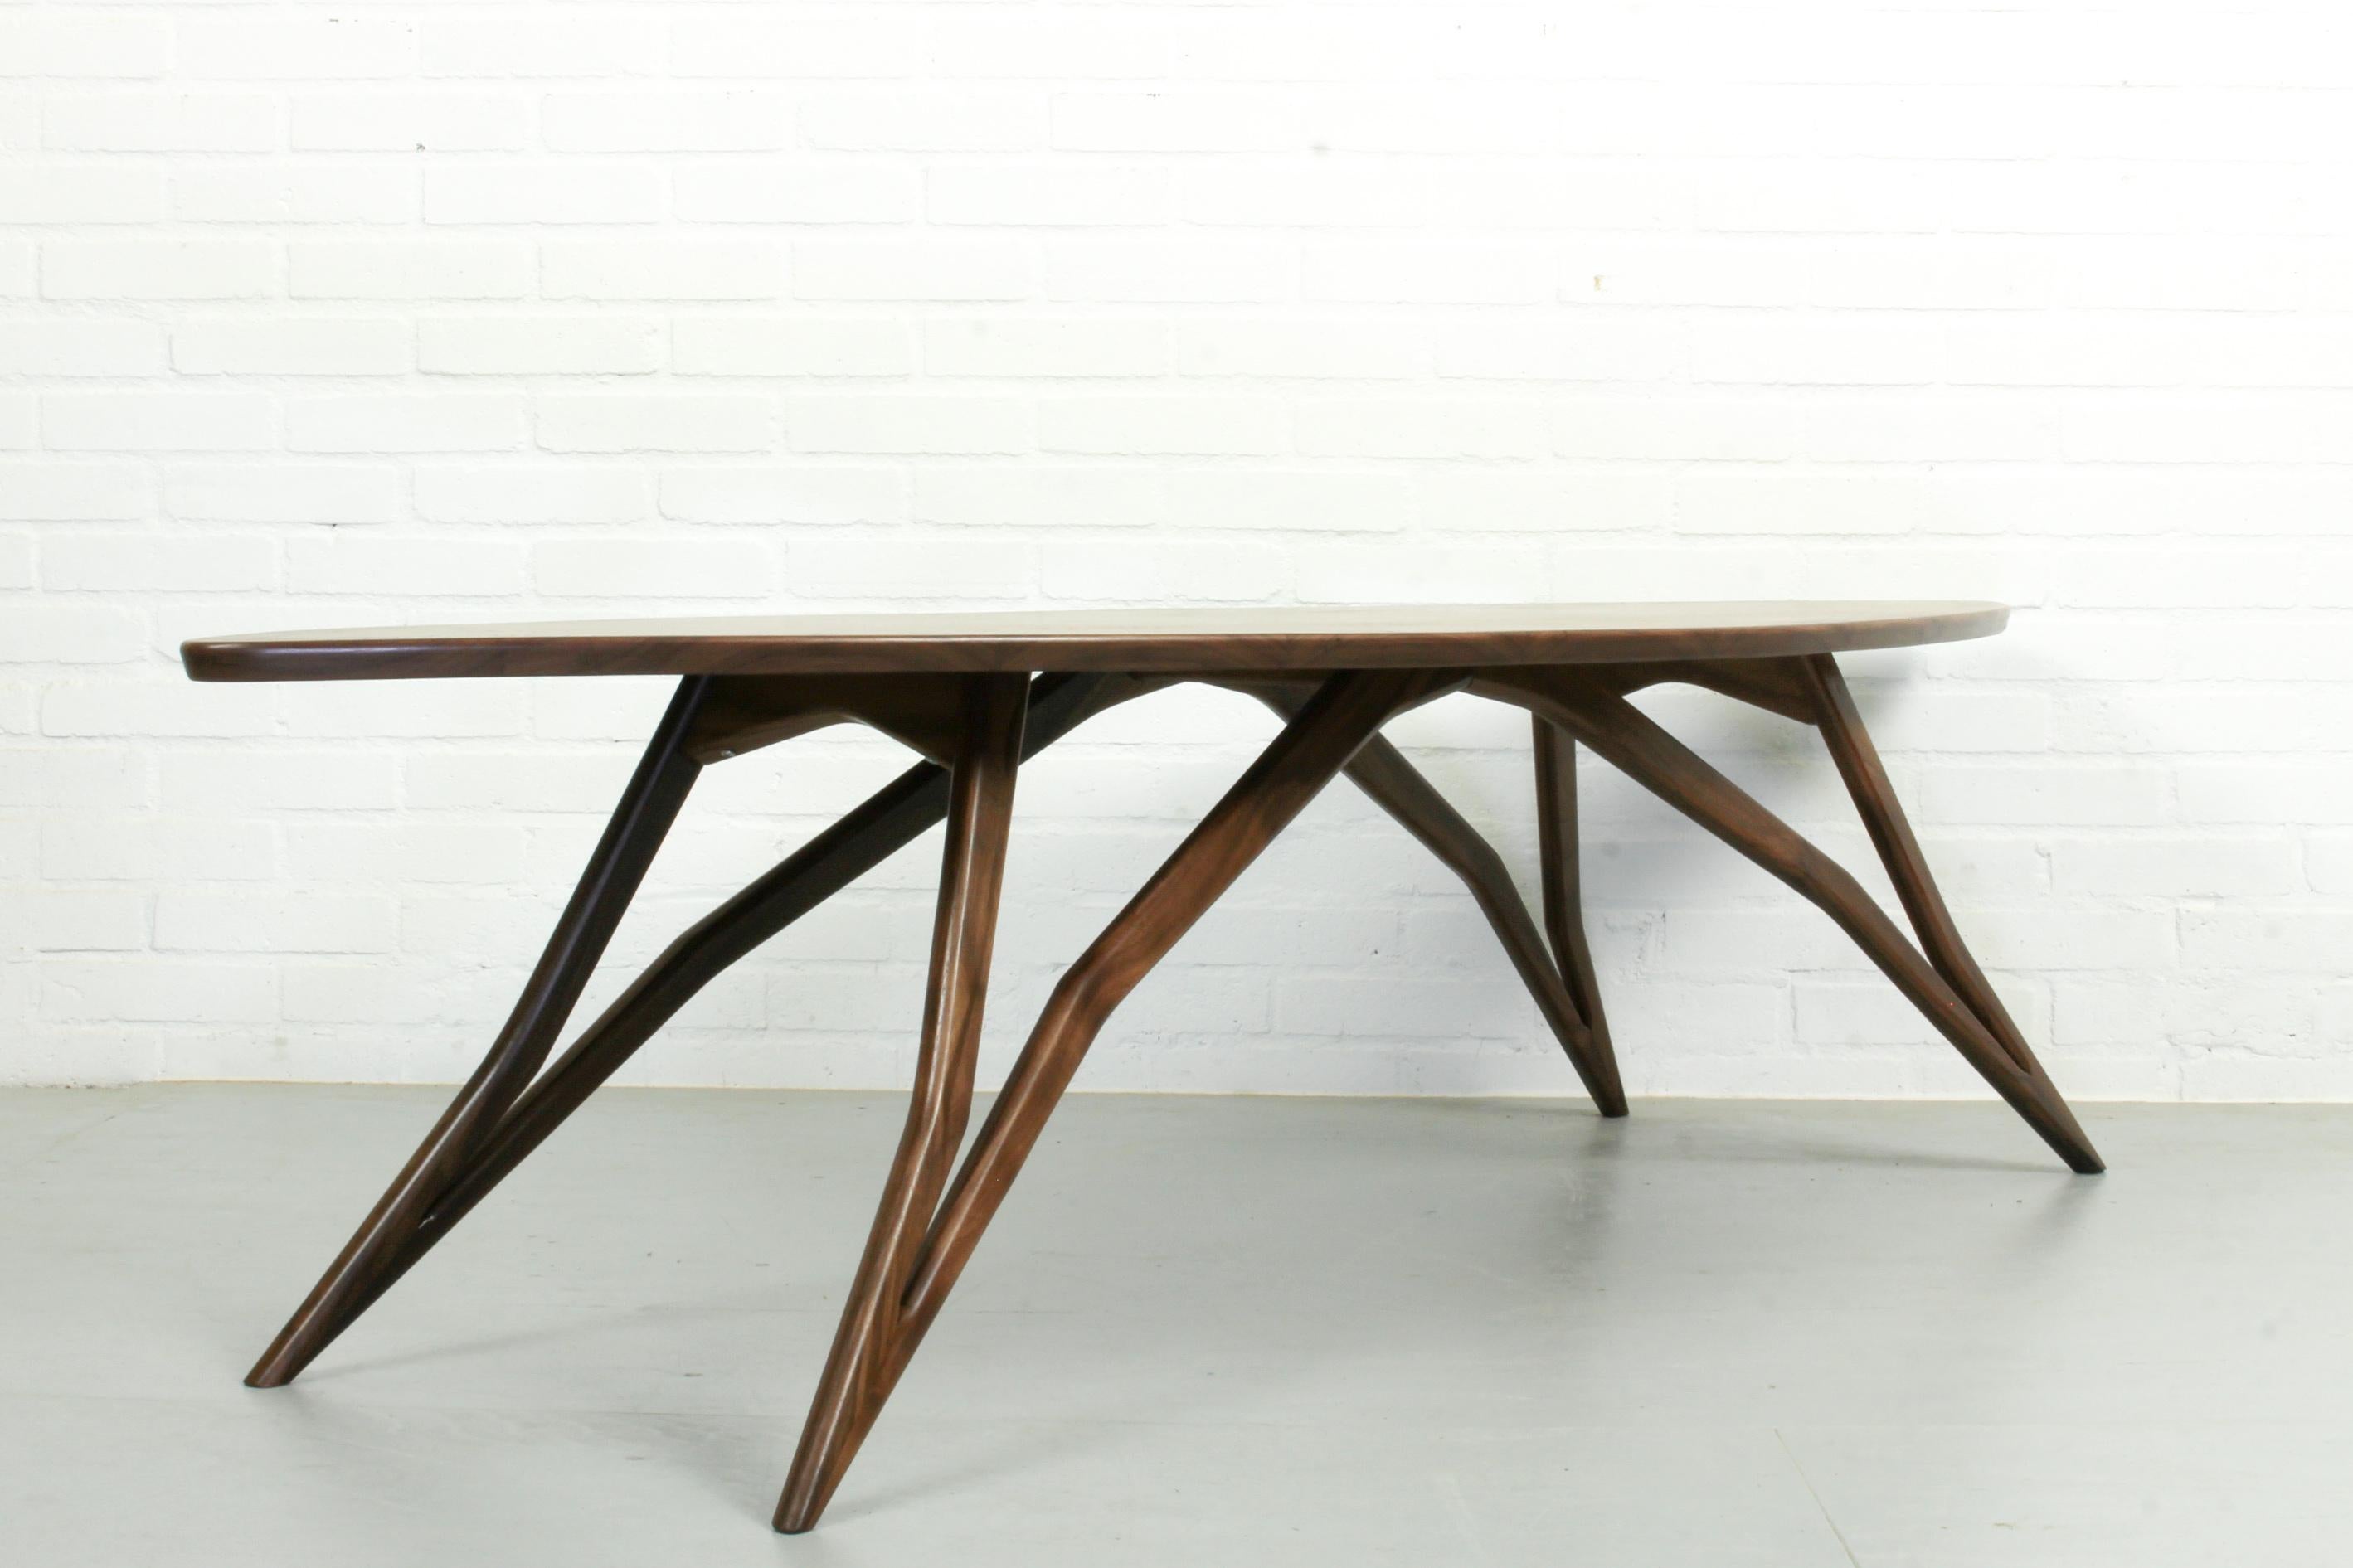 Dutch Midcentury Style Curved American Nut Coffee Table For Sale